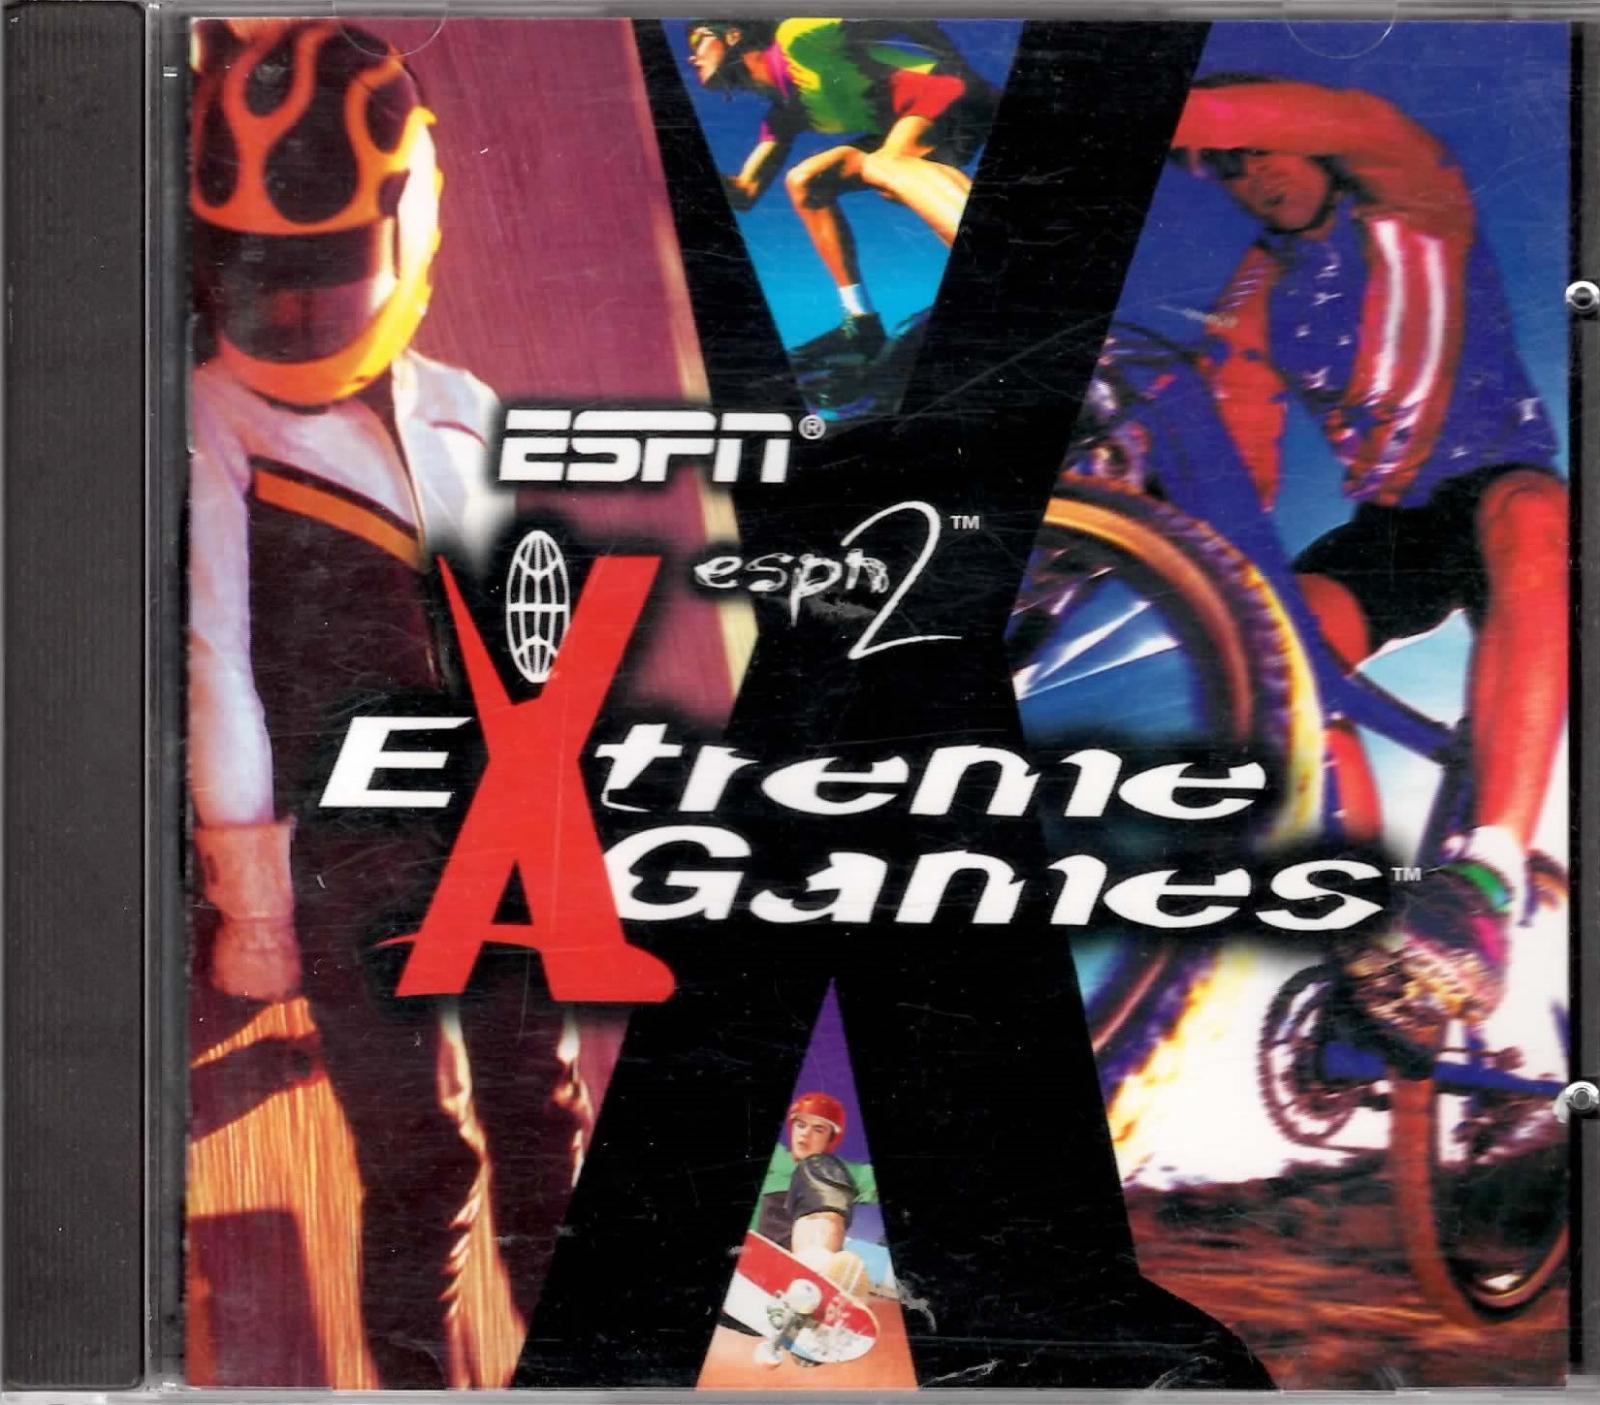 Espn 2 Extreme Games Prices Pc Games Compare Loose Cib And New Prices